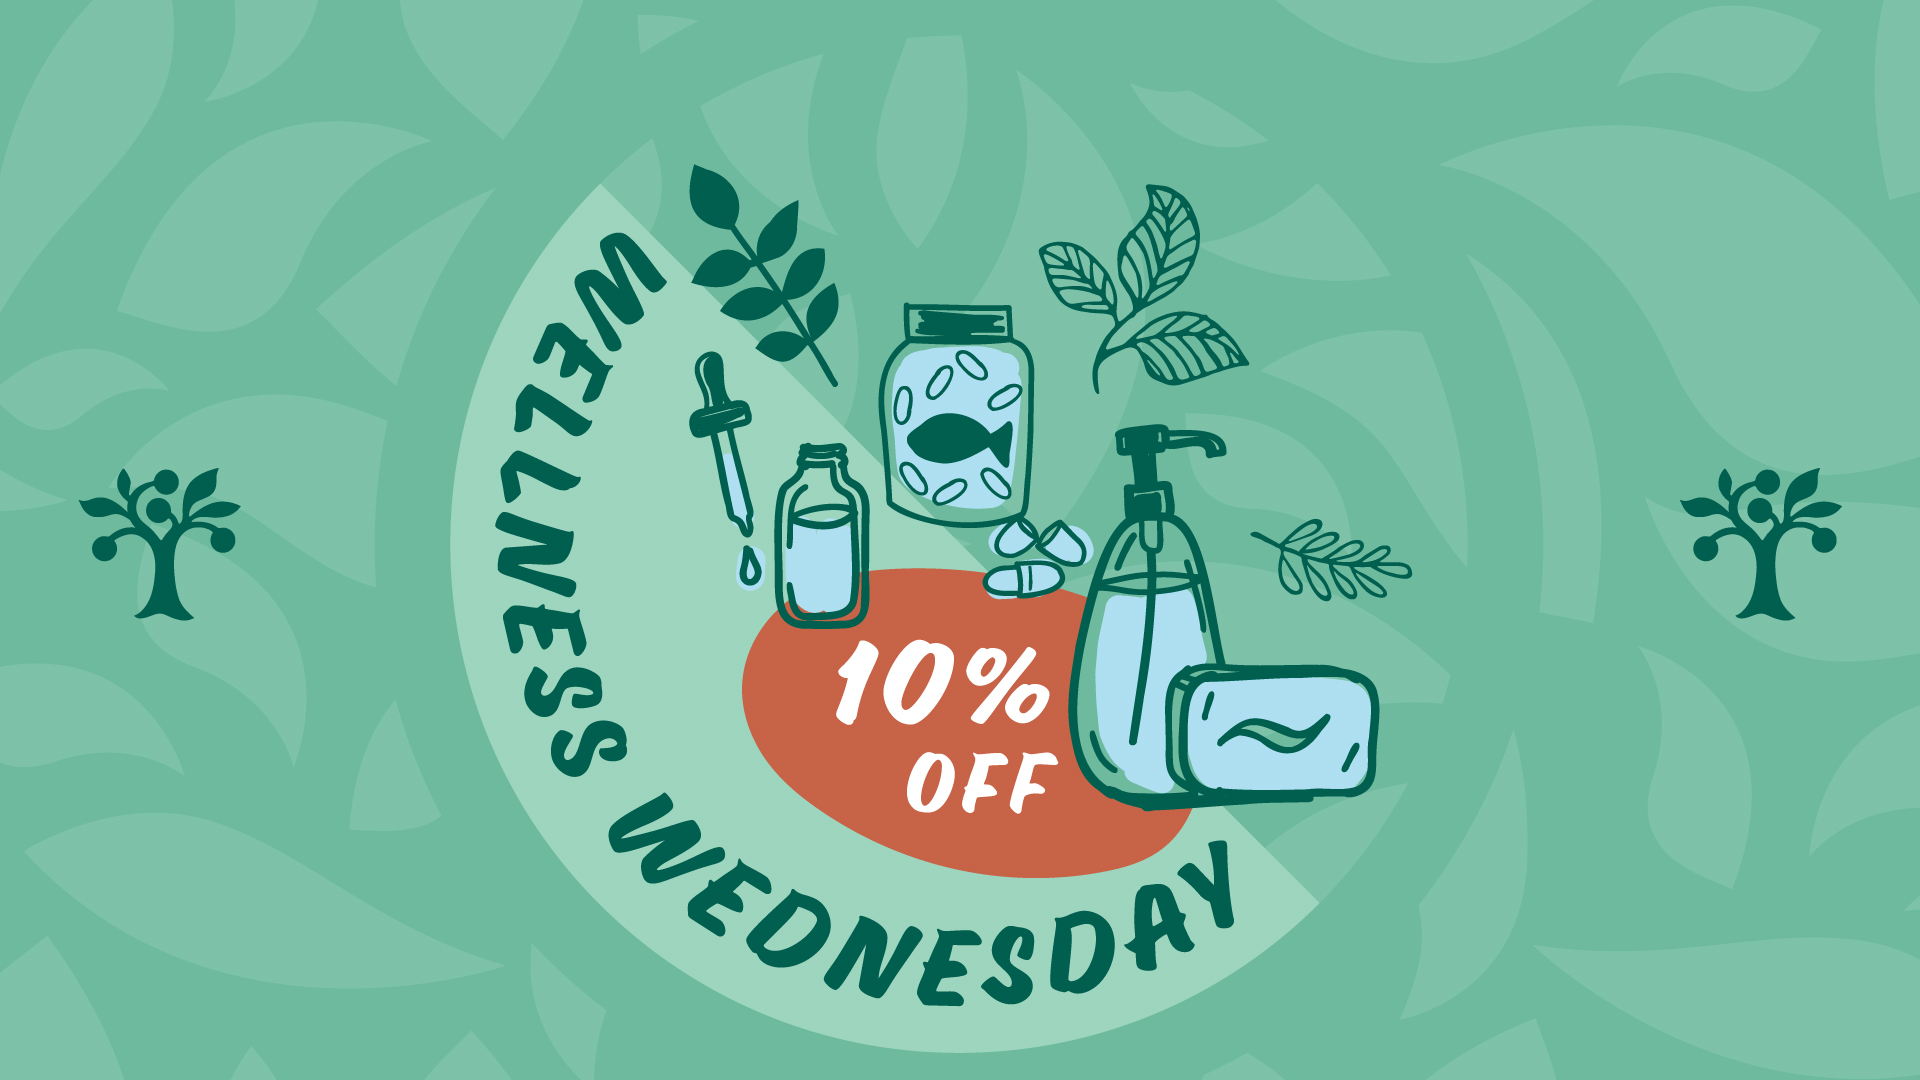 A graphic for 10% off on Wellness Wednesday